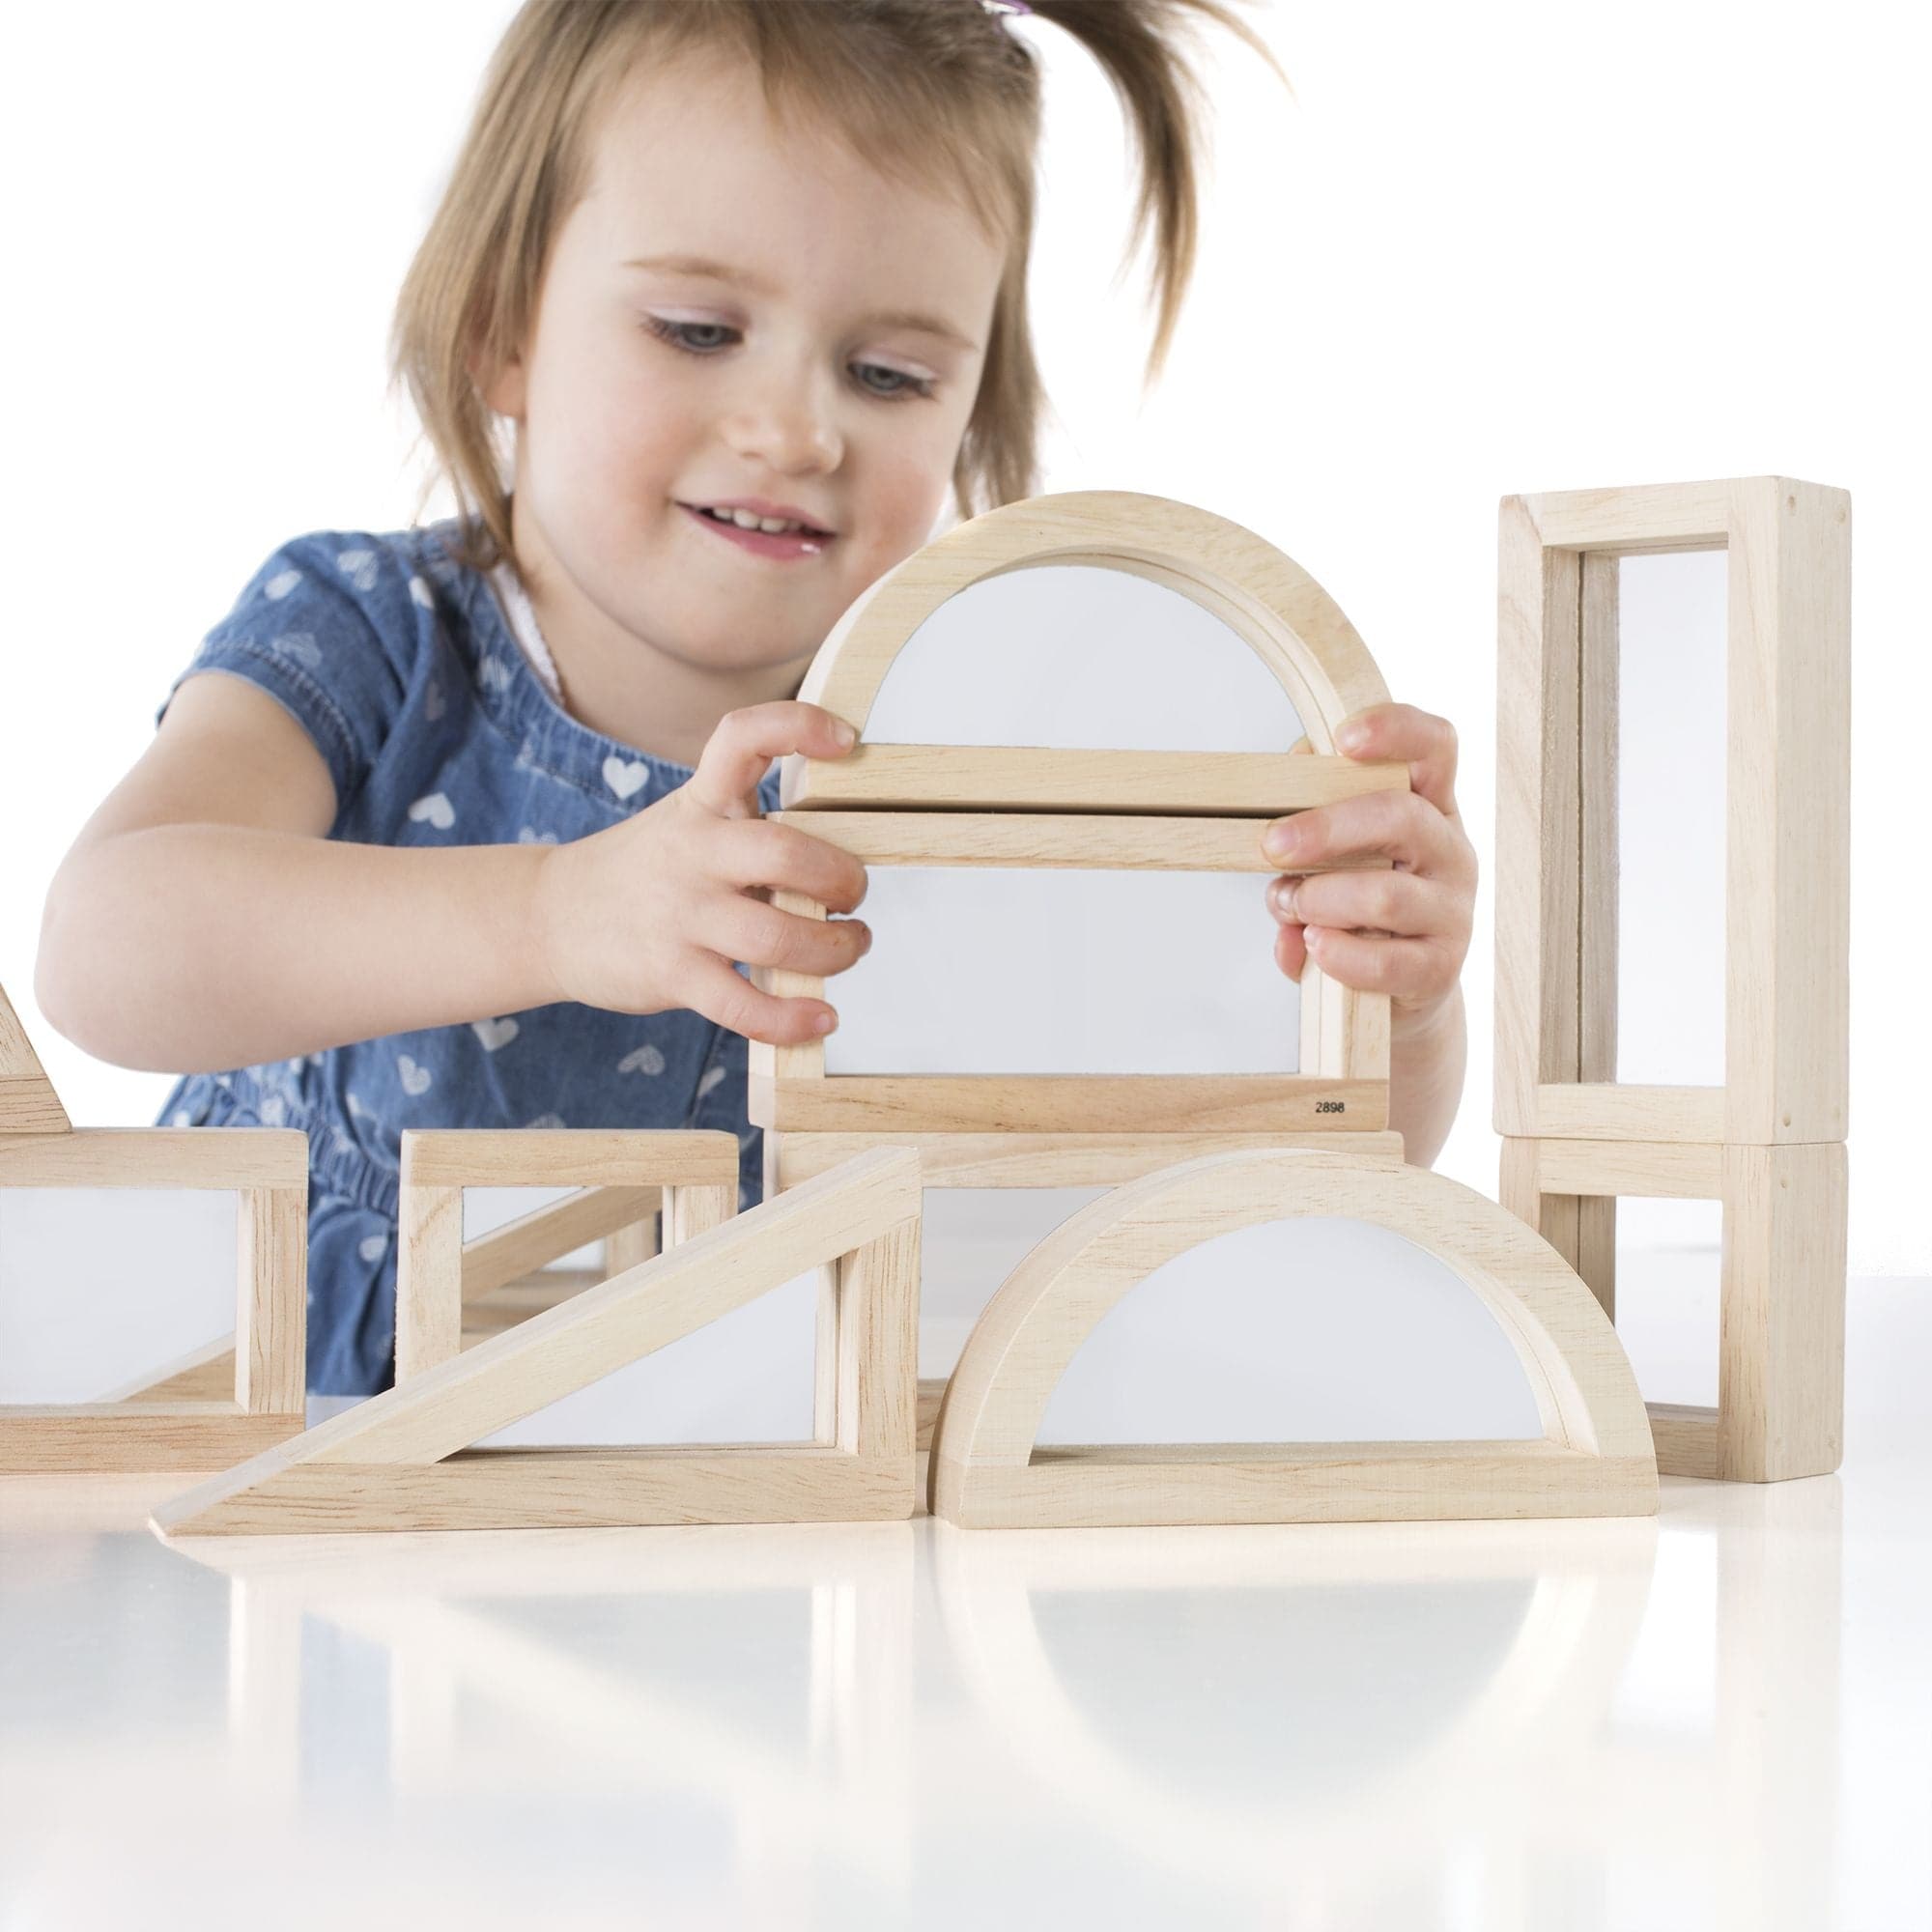 Guidecraft Mirror Blocks, The Set of 10 Guidecraft Mirror Blocks features hardwood frames with soft, rounded corners and Mylar mirrored double faced interiors. The Guidecraft Mirror Blocks have smooth rounded corners and edges making for safe play for children 2 plus. The Guidecraft Mirror Blocks are great for indoor and outdoor STEM activities and have an educational focus and can help children develop core skills such as Visual perception,sizes and relationships and block play. Hardwood block set with mir